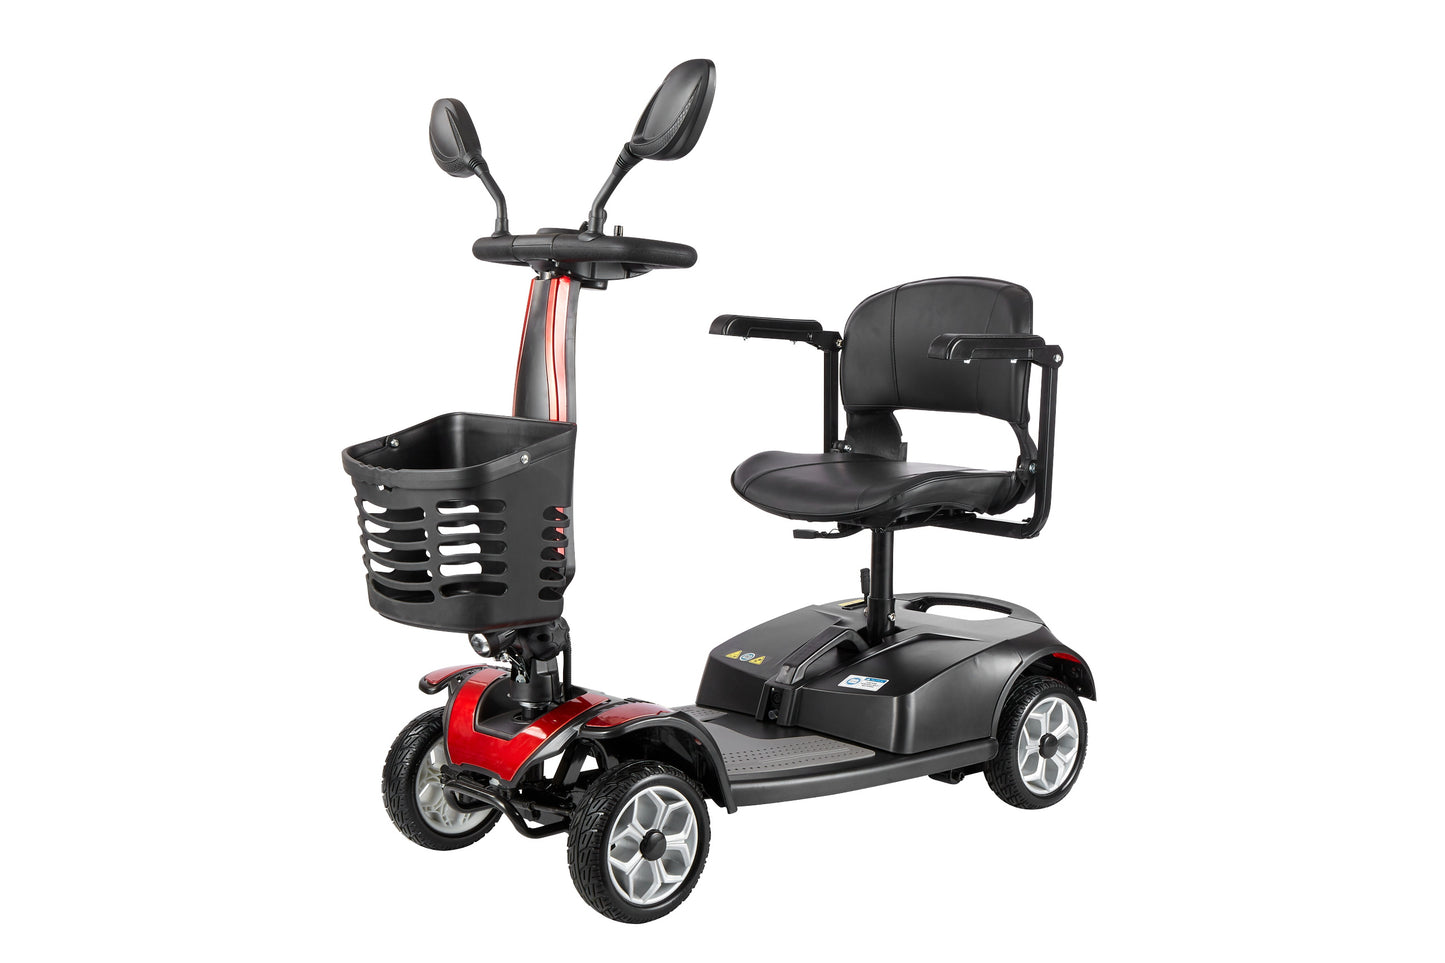 Mantra - 4 Wheel Foldable Light Weight Scooter in stock